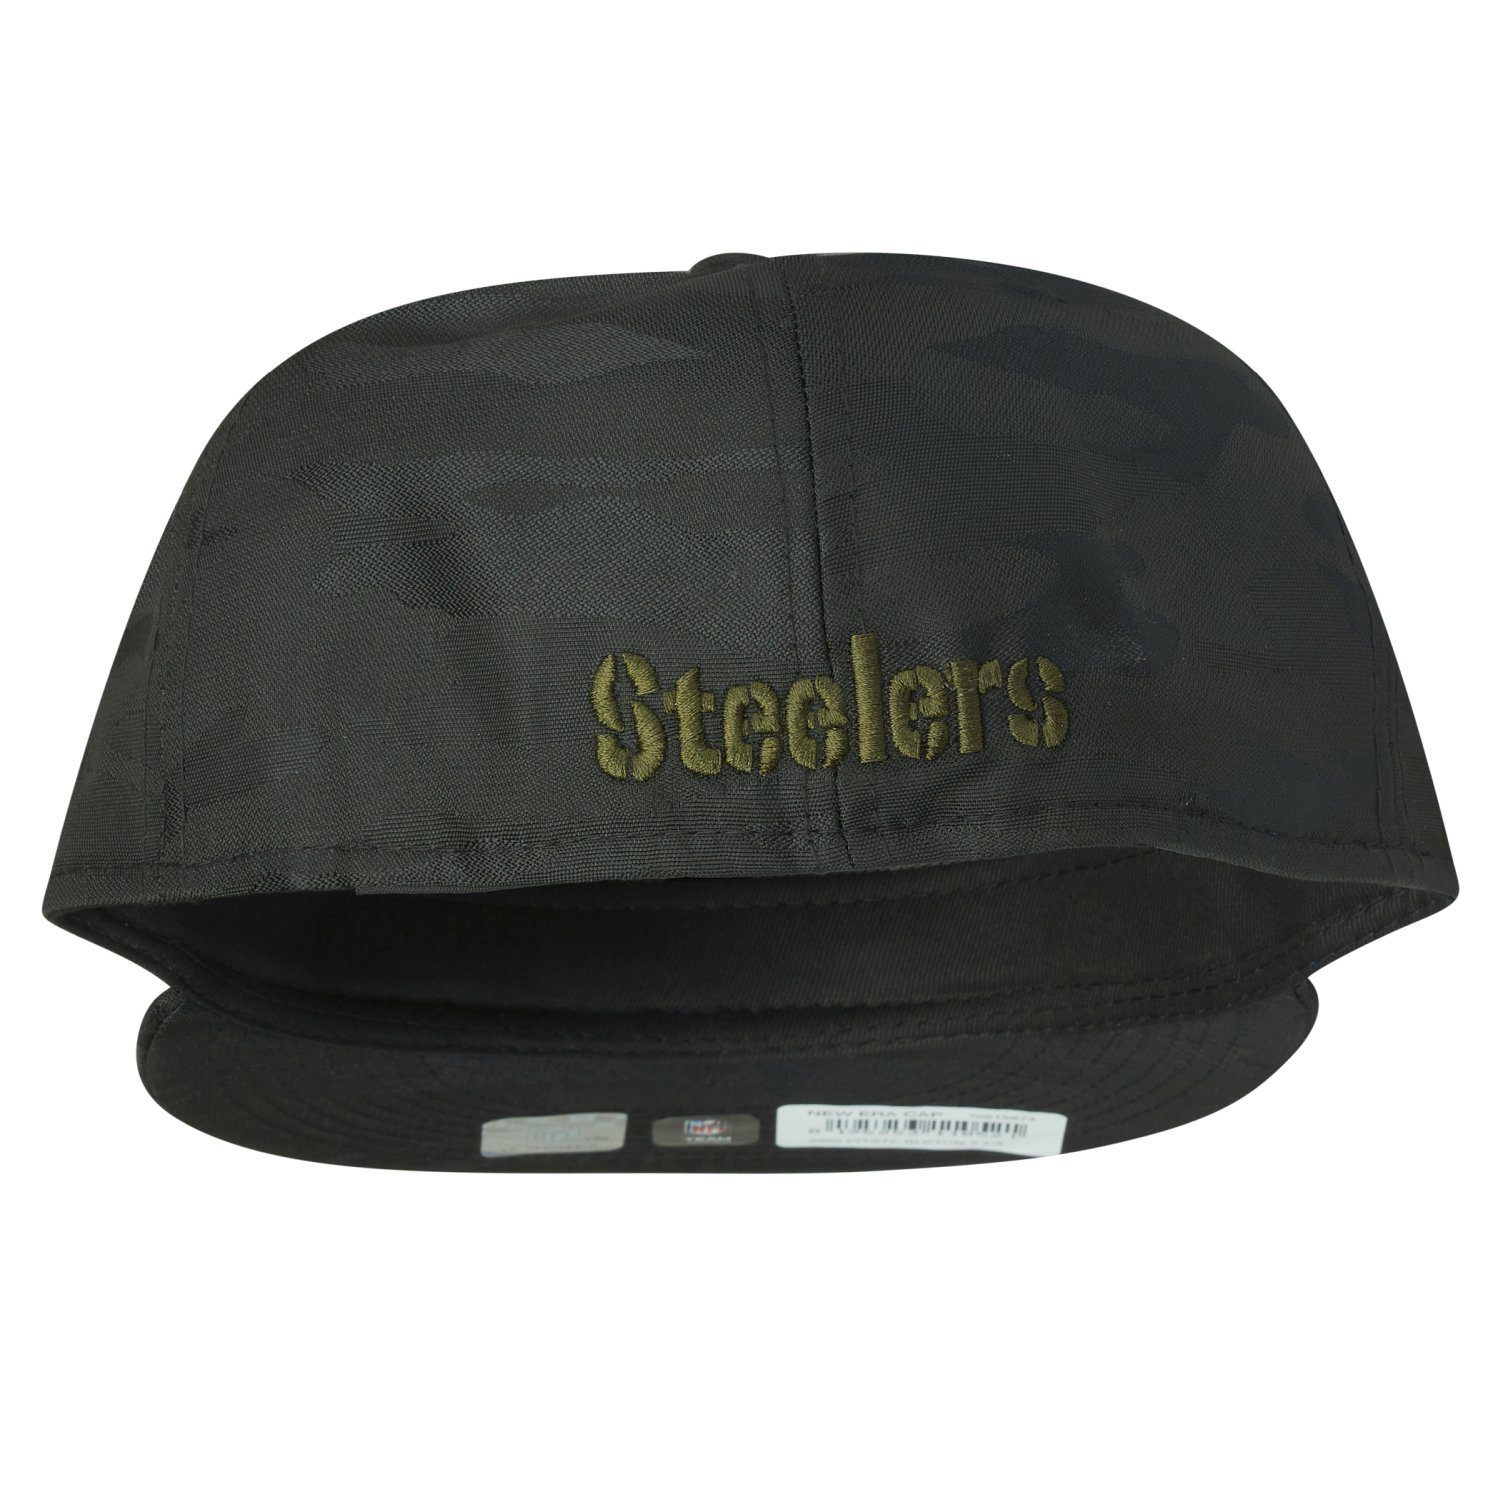 New Fitted 59Fifty Era Cap TEAMS alpine Pittsburgh NFL Steelers